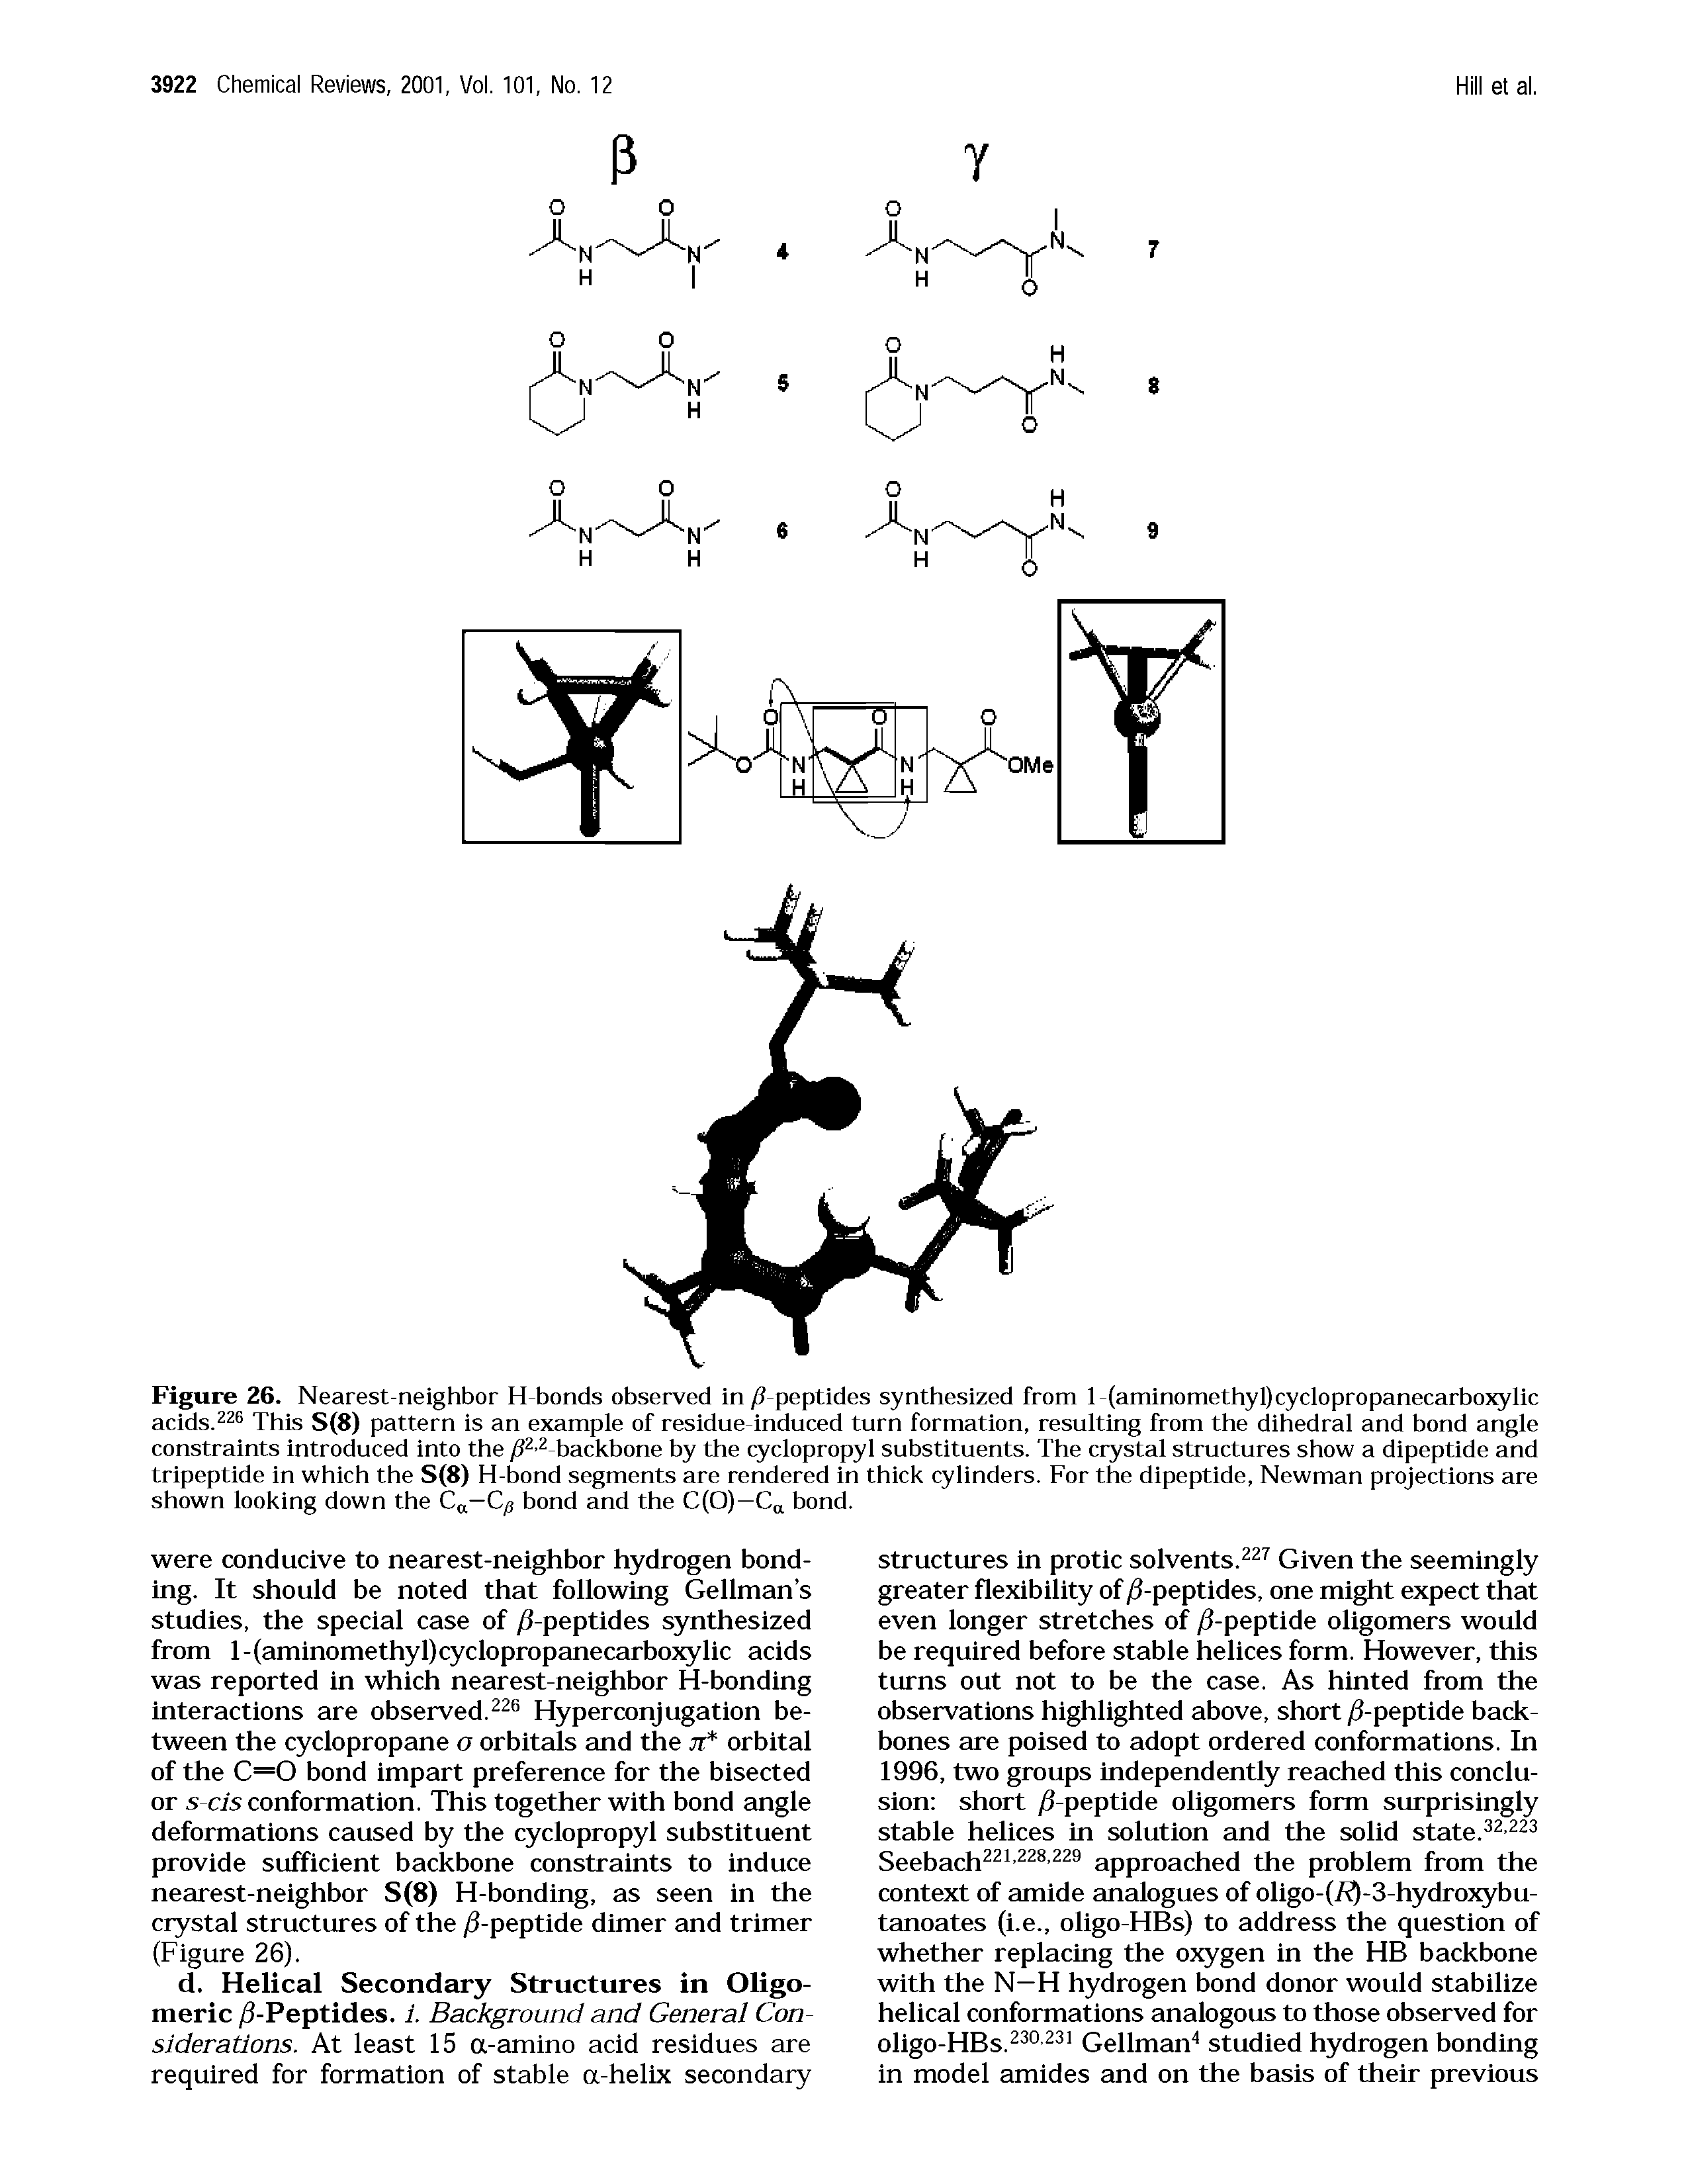 Figure 26. Nearest-neighbor H-bonds observed in ( peptides synthesized from l-(aminomethyl)cyclopropanecarboxylic acids.226 This S(8) pattern is an example of residue-induced turn formation, resulting from the dihedral and bond angle constraints introduced into the ft2-2 backbone by the cyclopropyl substituents. The crystal structures show a dipeptide and tripeptide in which the S(8) H-bond segments are rendered in thick cylinders. For the dipeptide, Newman projections are shown looking down the Ca—Cp bond and the C(O)—Ca bond.